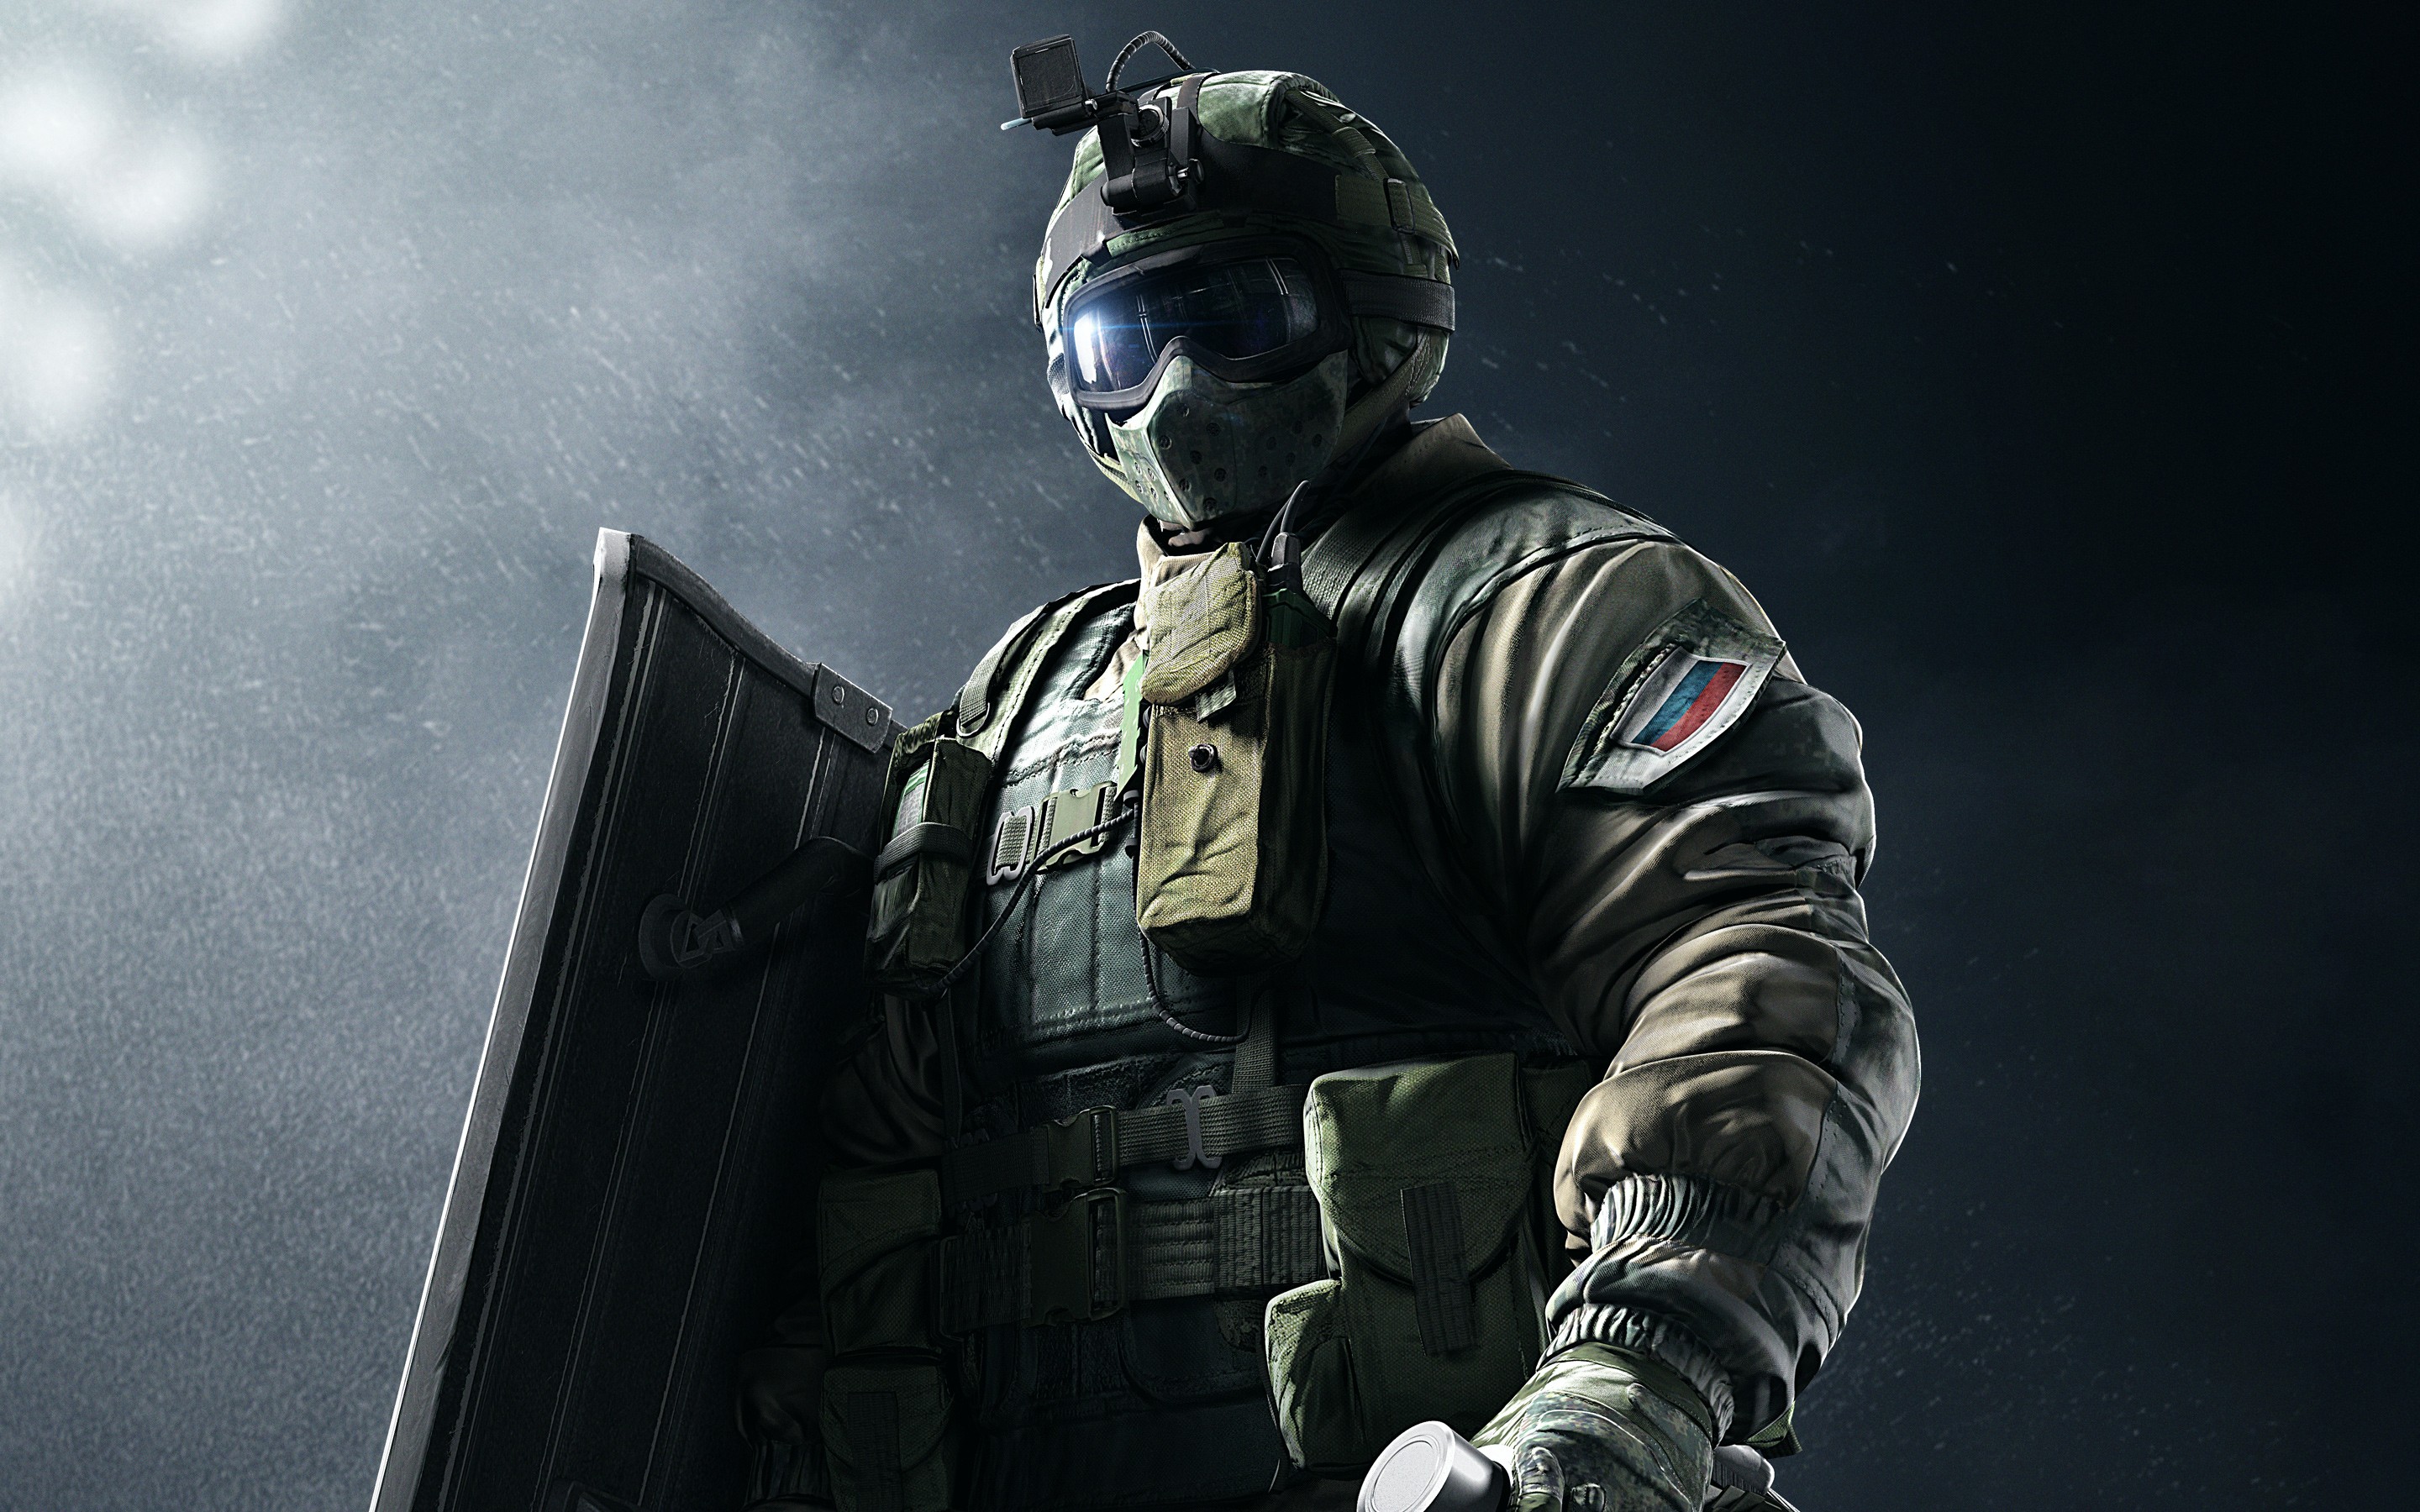 rainbow six siege wallpaper,pc game,soldier,darkness,personal protective equipment,digital compositing